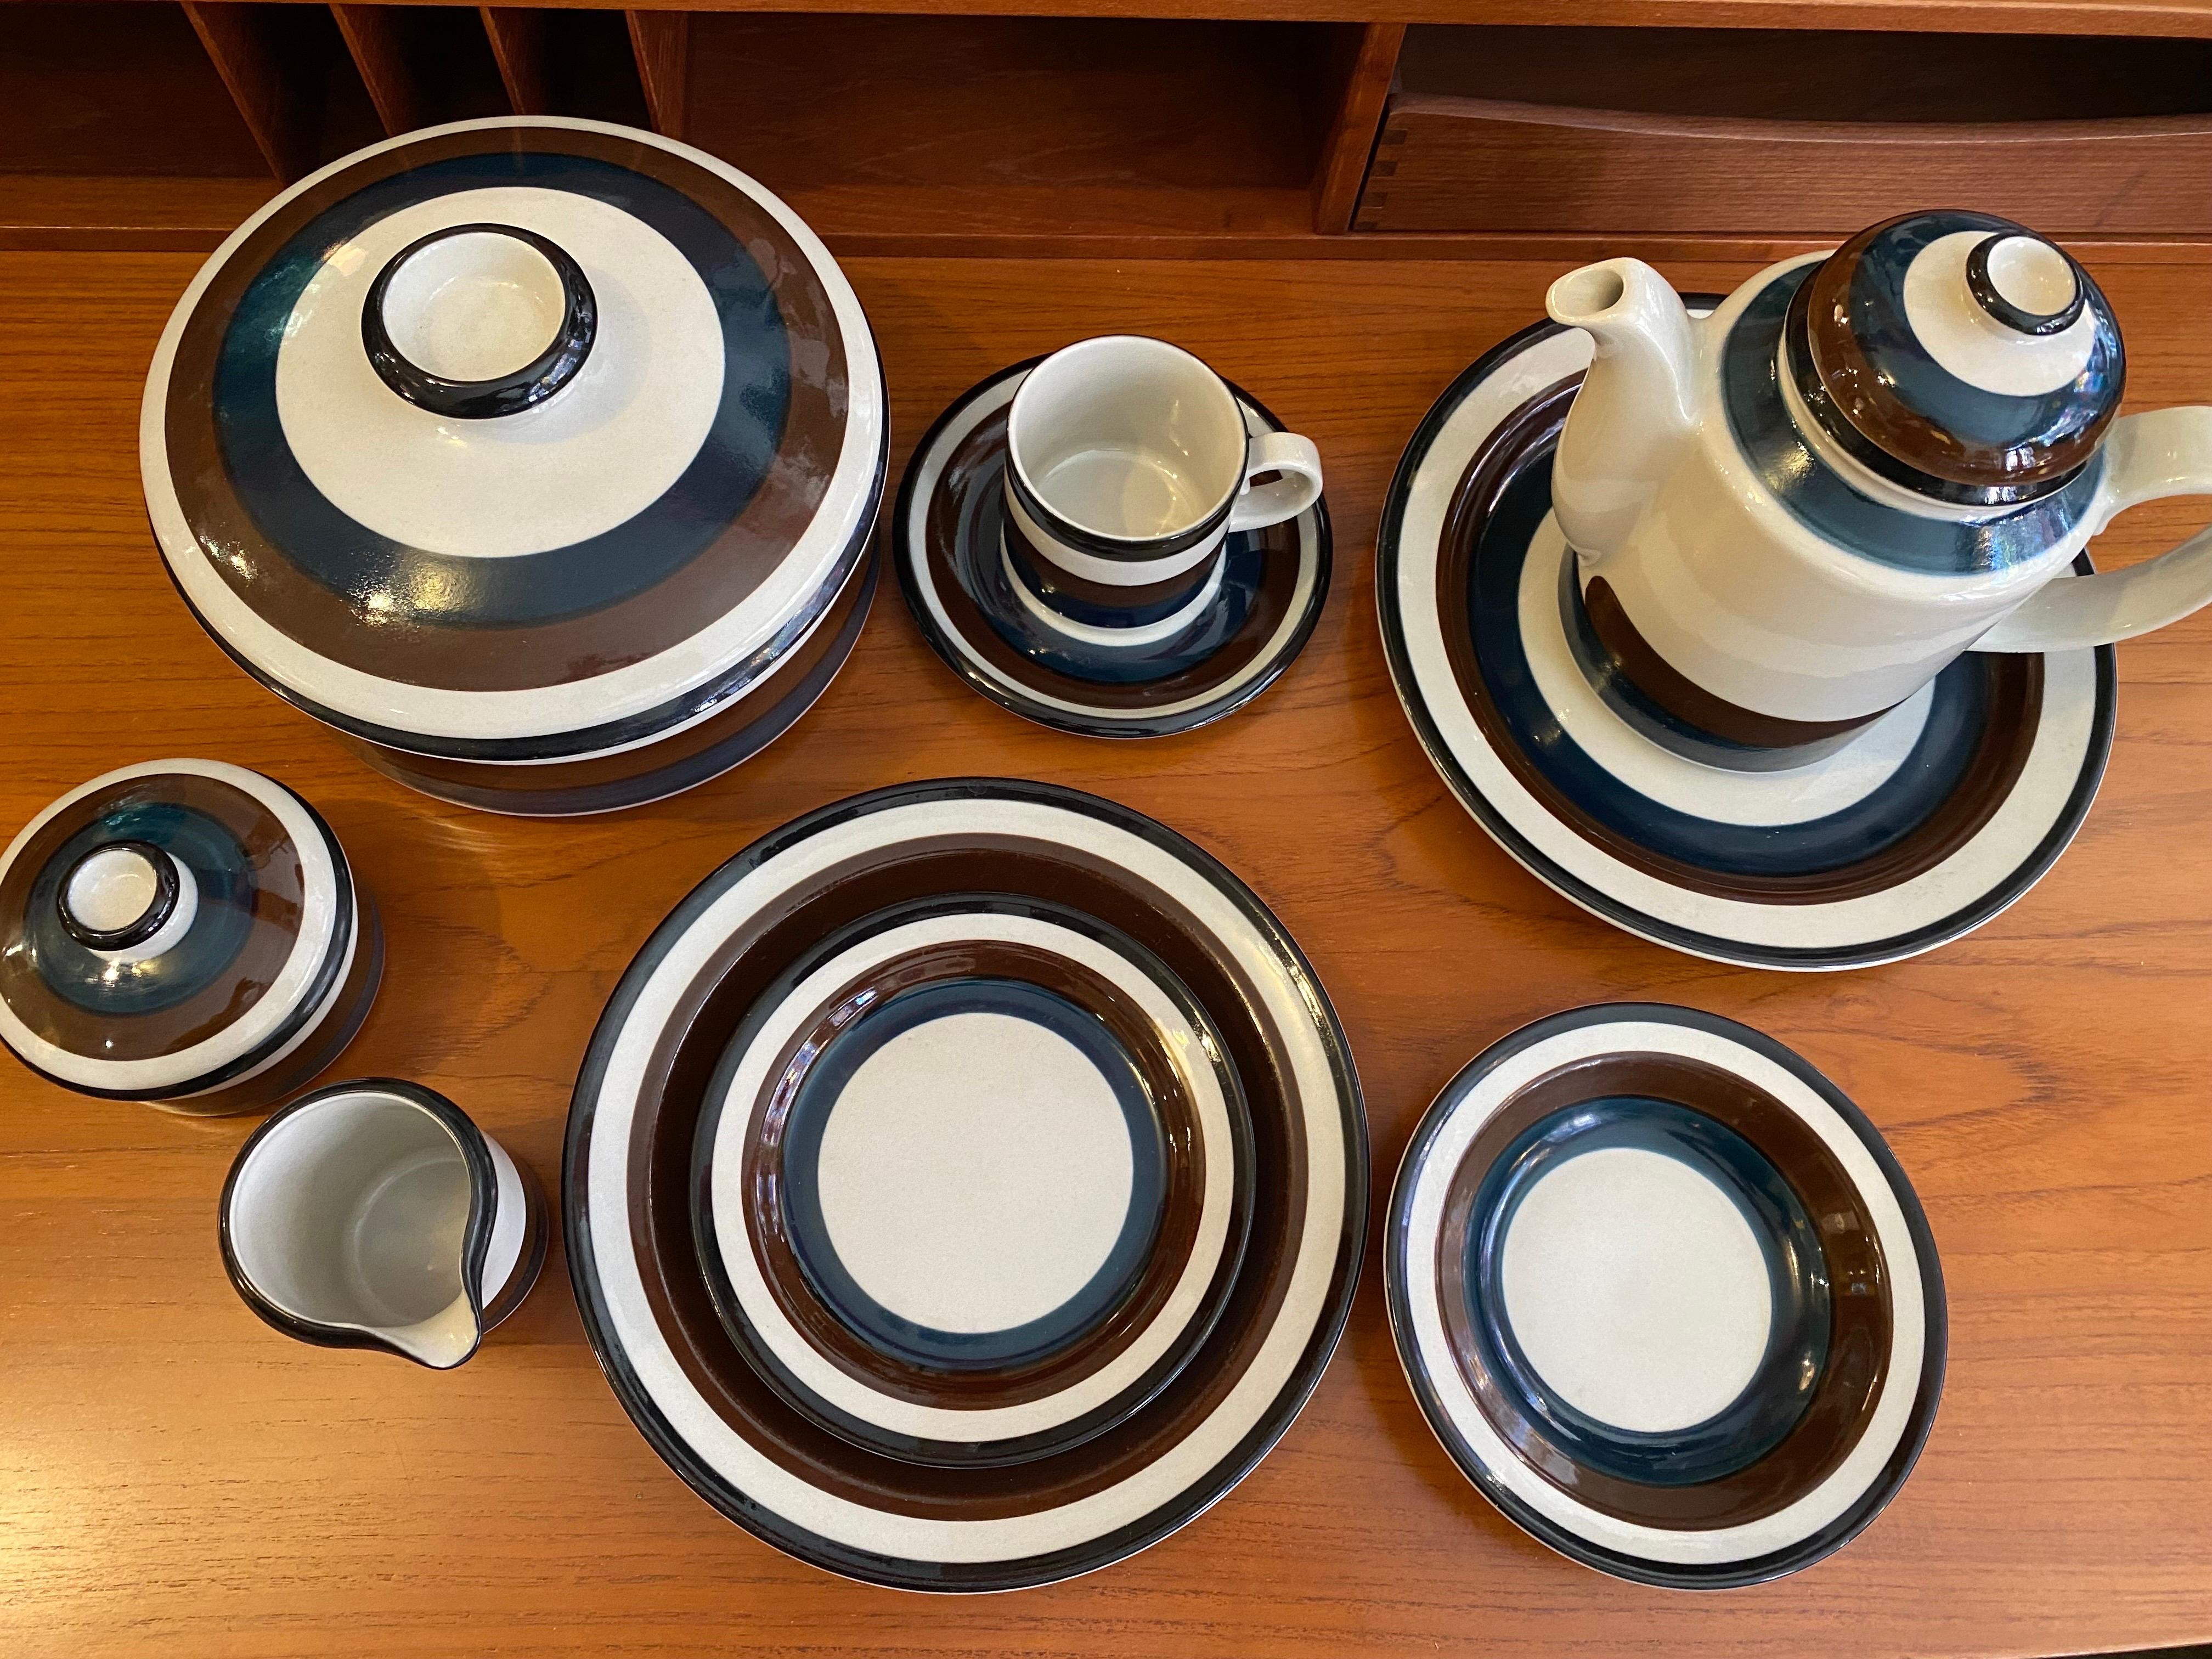 Beautiful set of Arabia of Finland, Kaira dish set for 12 place settings. Brown and blue stripes on a warm grey glaze.

(1) Casserole 8.25